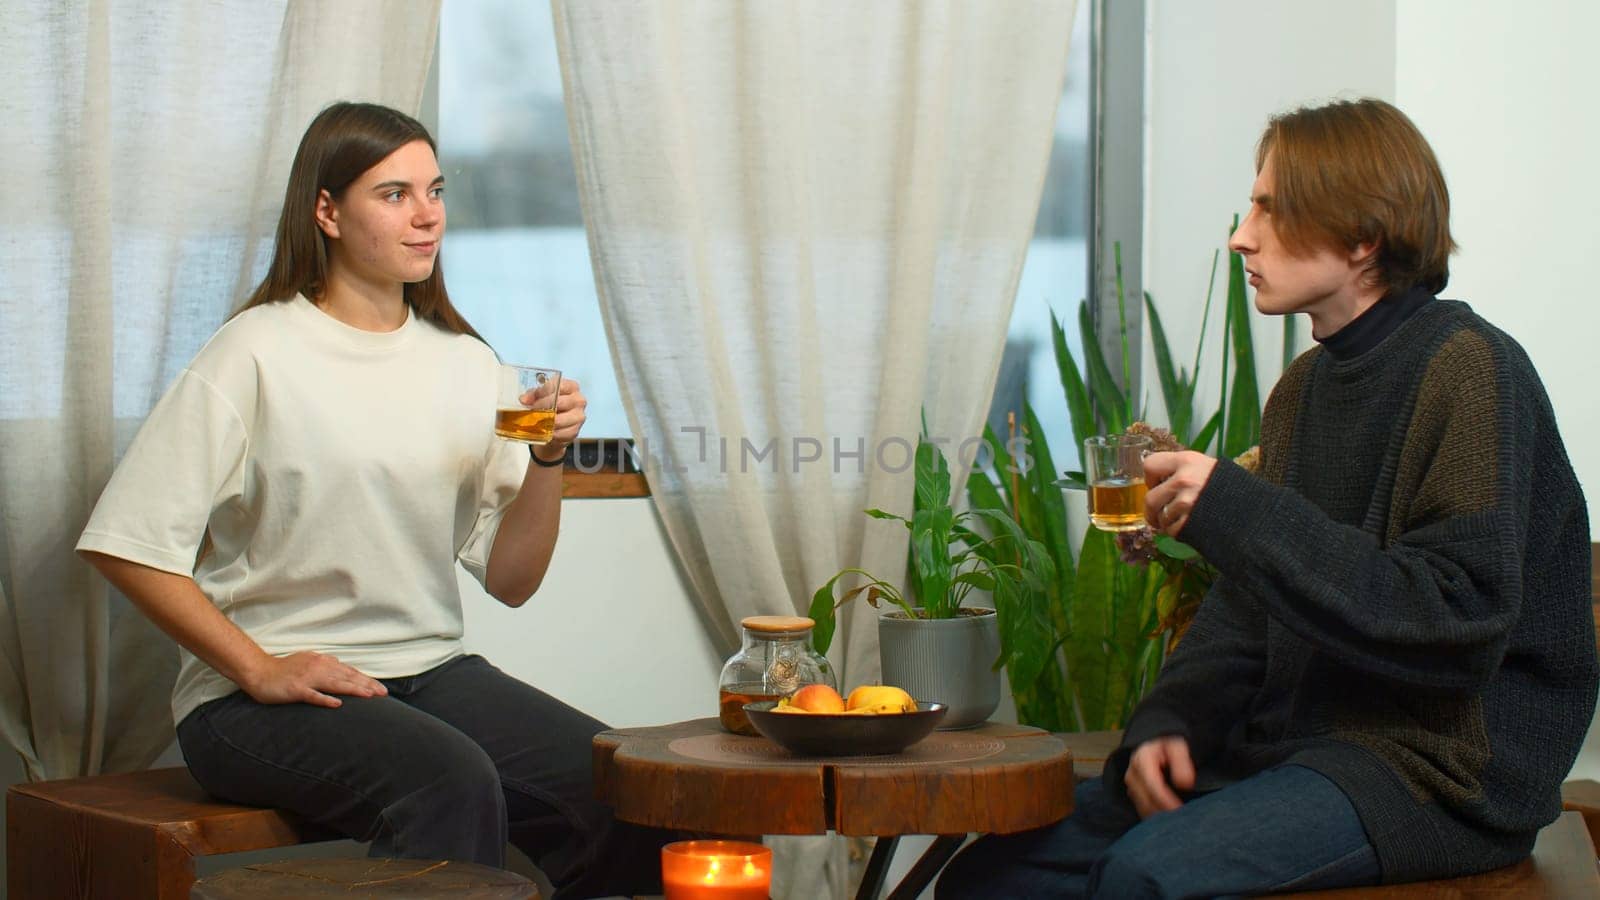 Students communicate and drink tea in cafe. Media. Young man and woman are drinking tea and talking in cafe. Cheerful conversation between young couple of students in cozy cafe.